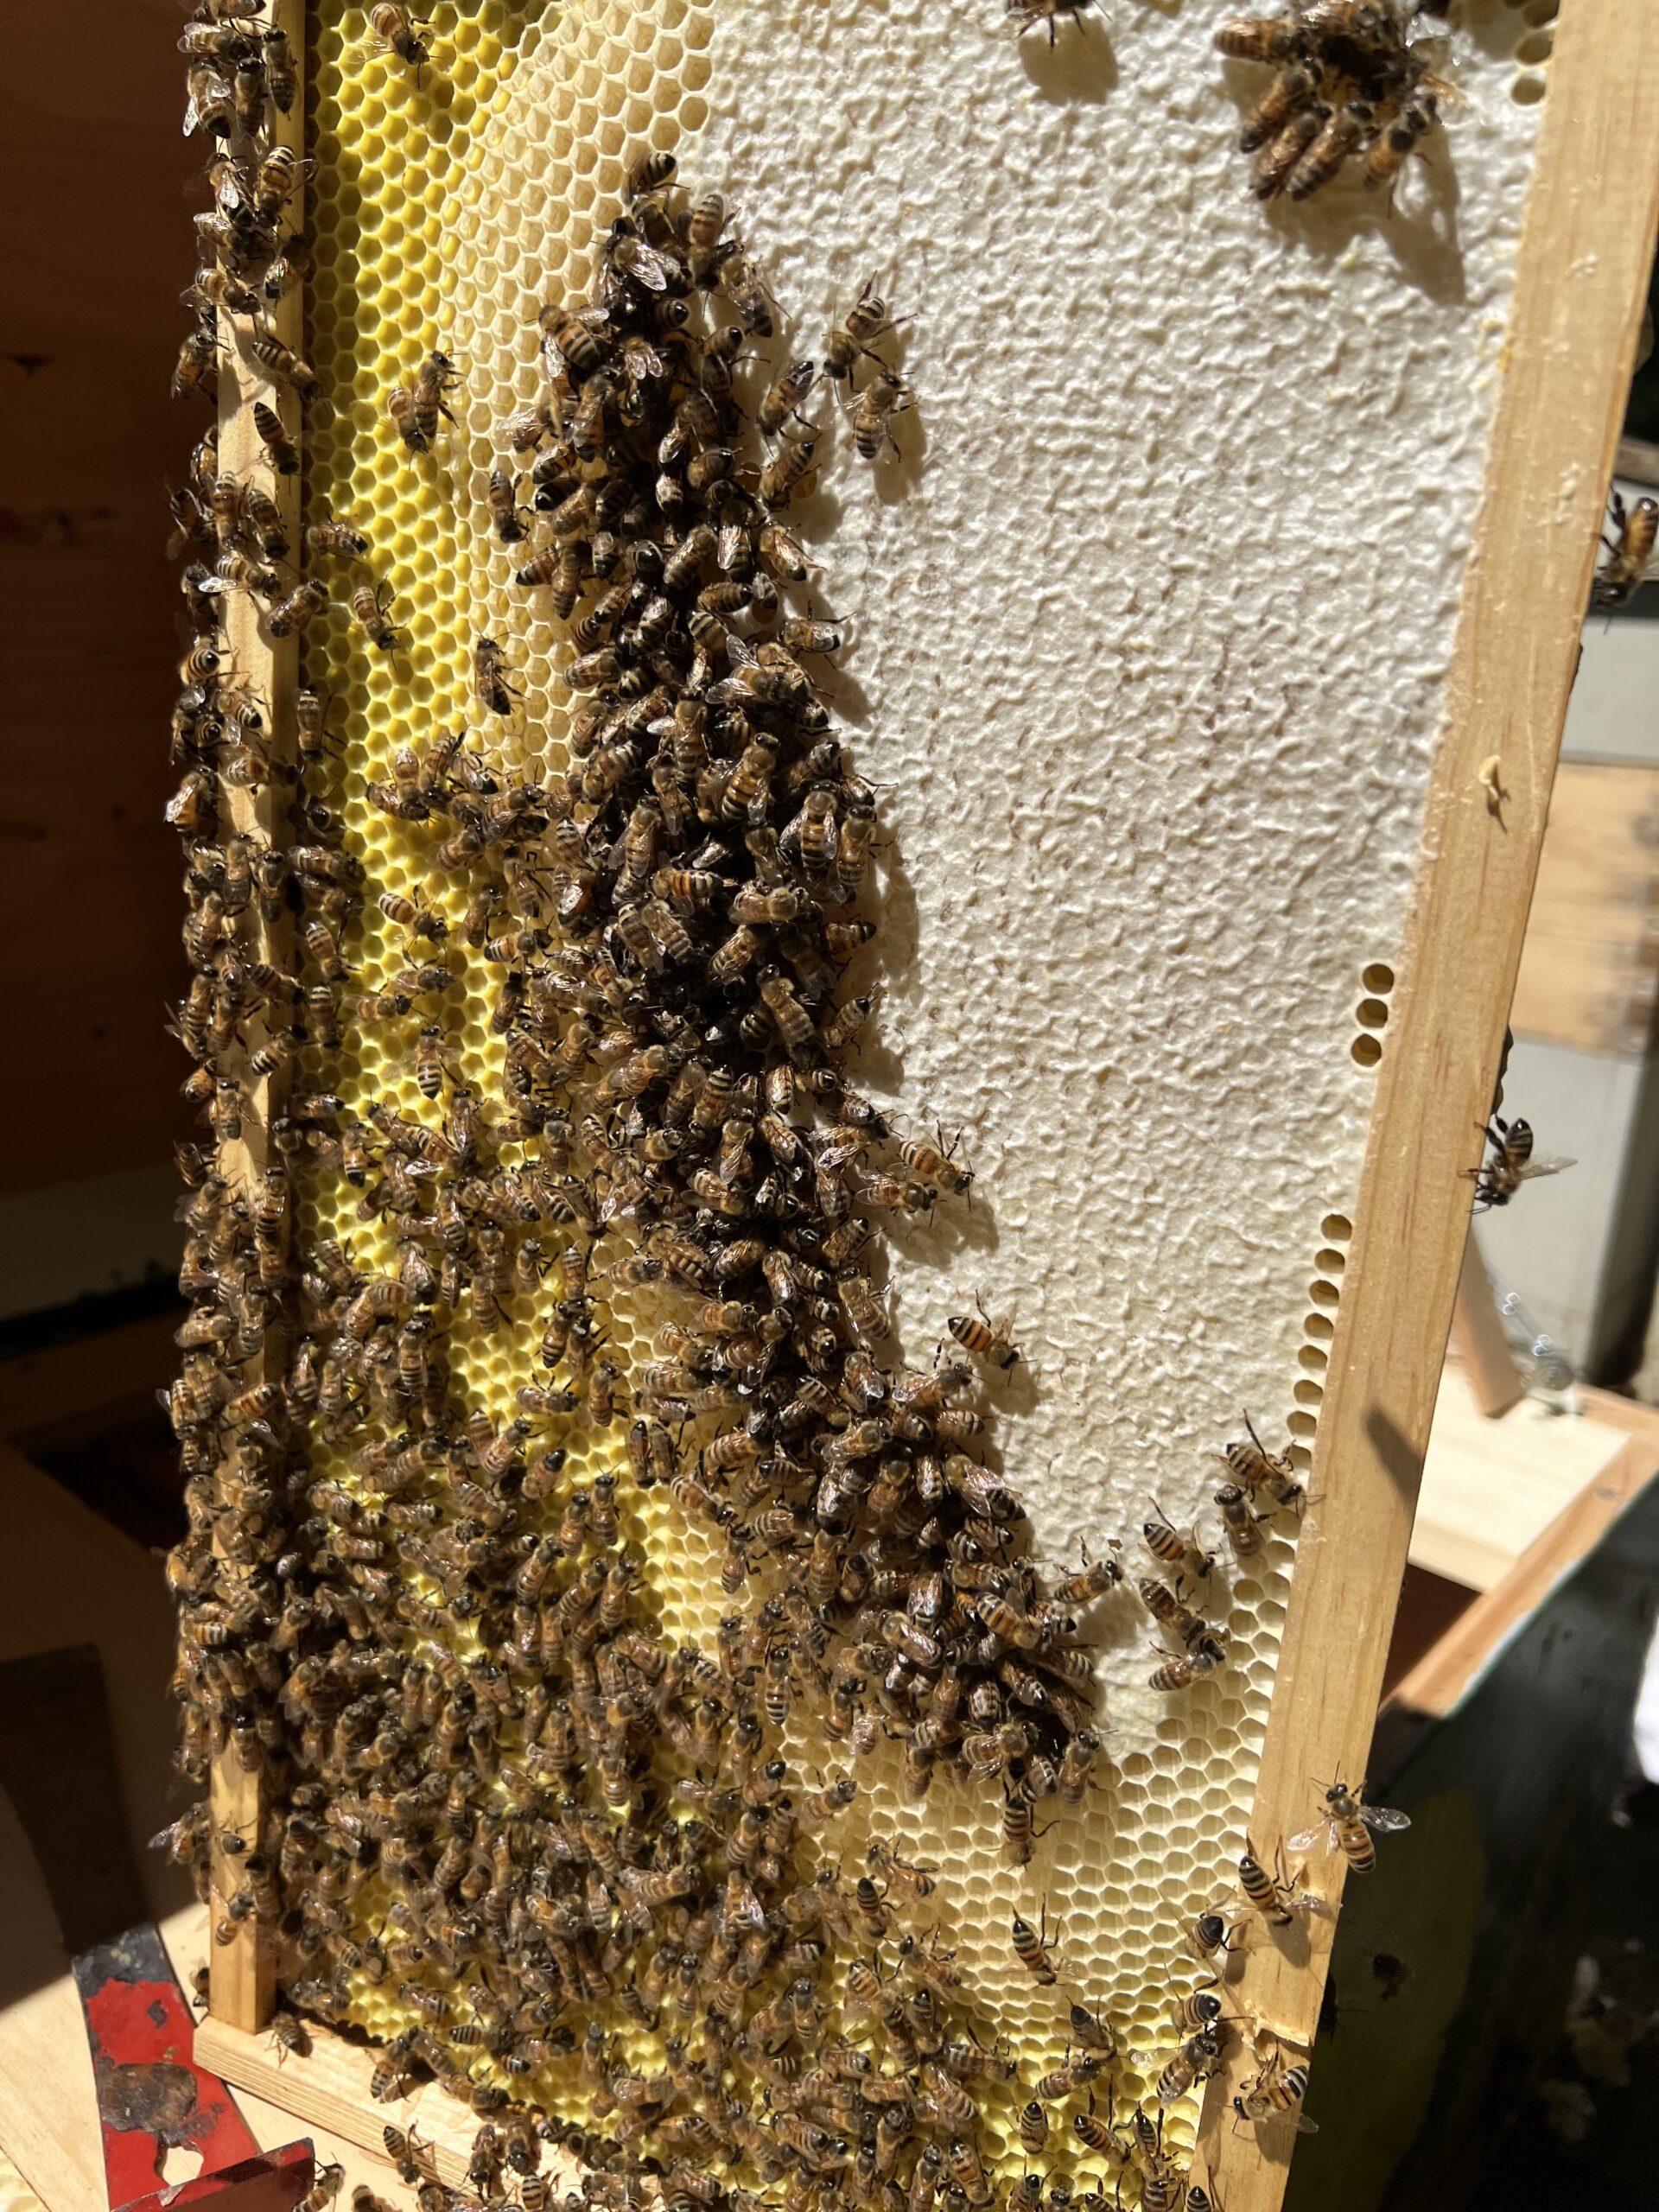 A frame from our one remaining hive, filling up with honey, but no brood in sight. LISA DAFFY